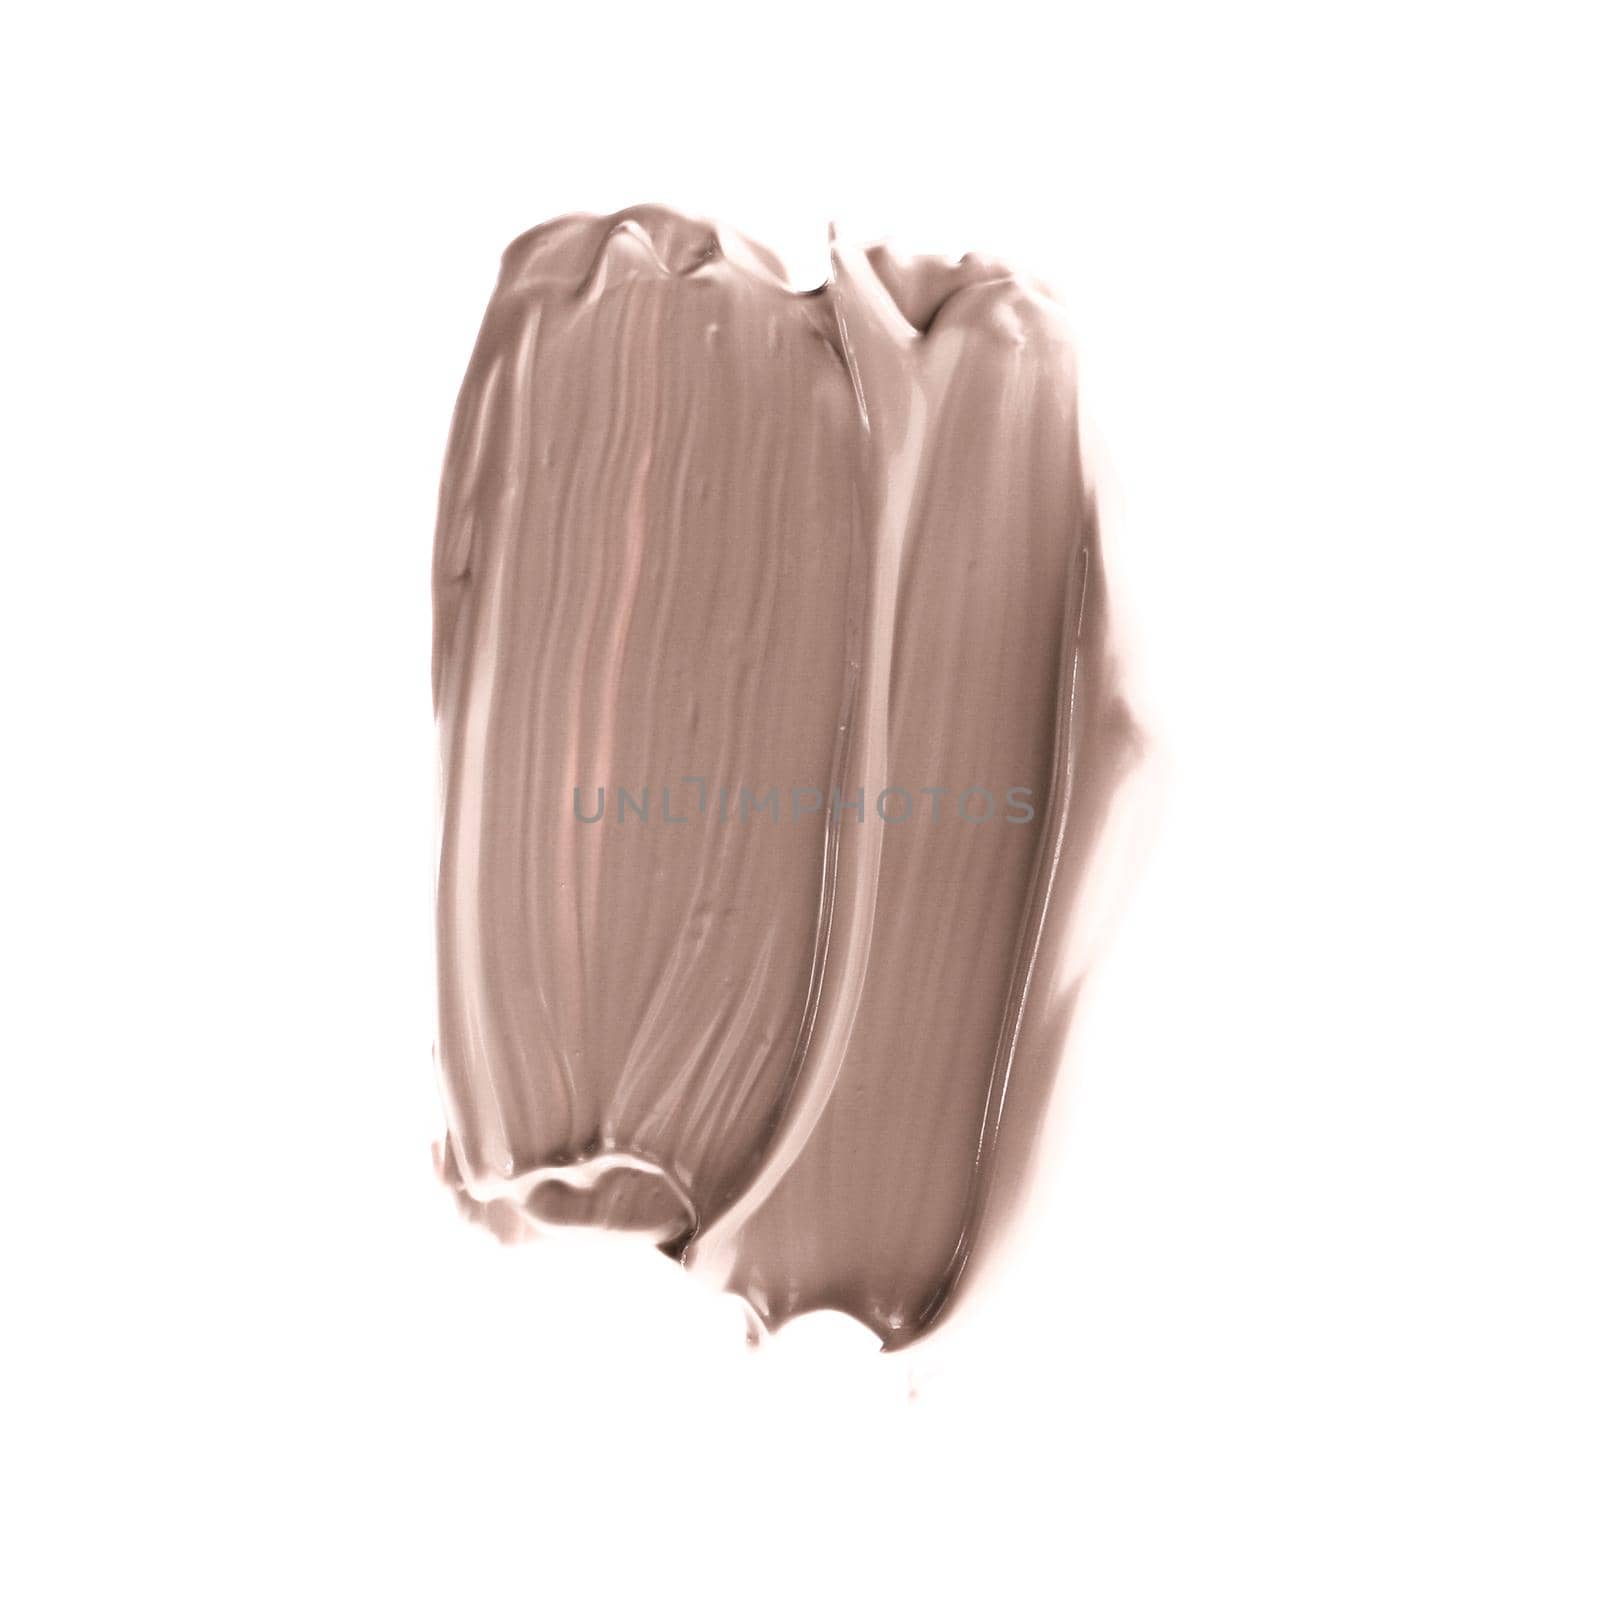 Cosmetic product, beauty background and texture concept - Make-up pale base foundation brush strokes and smudge